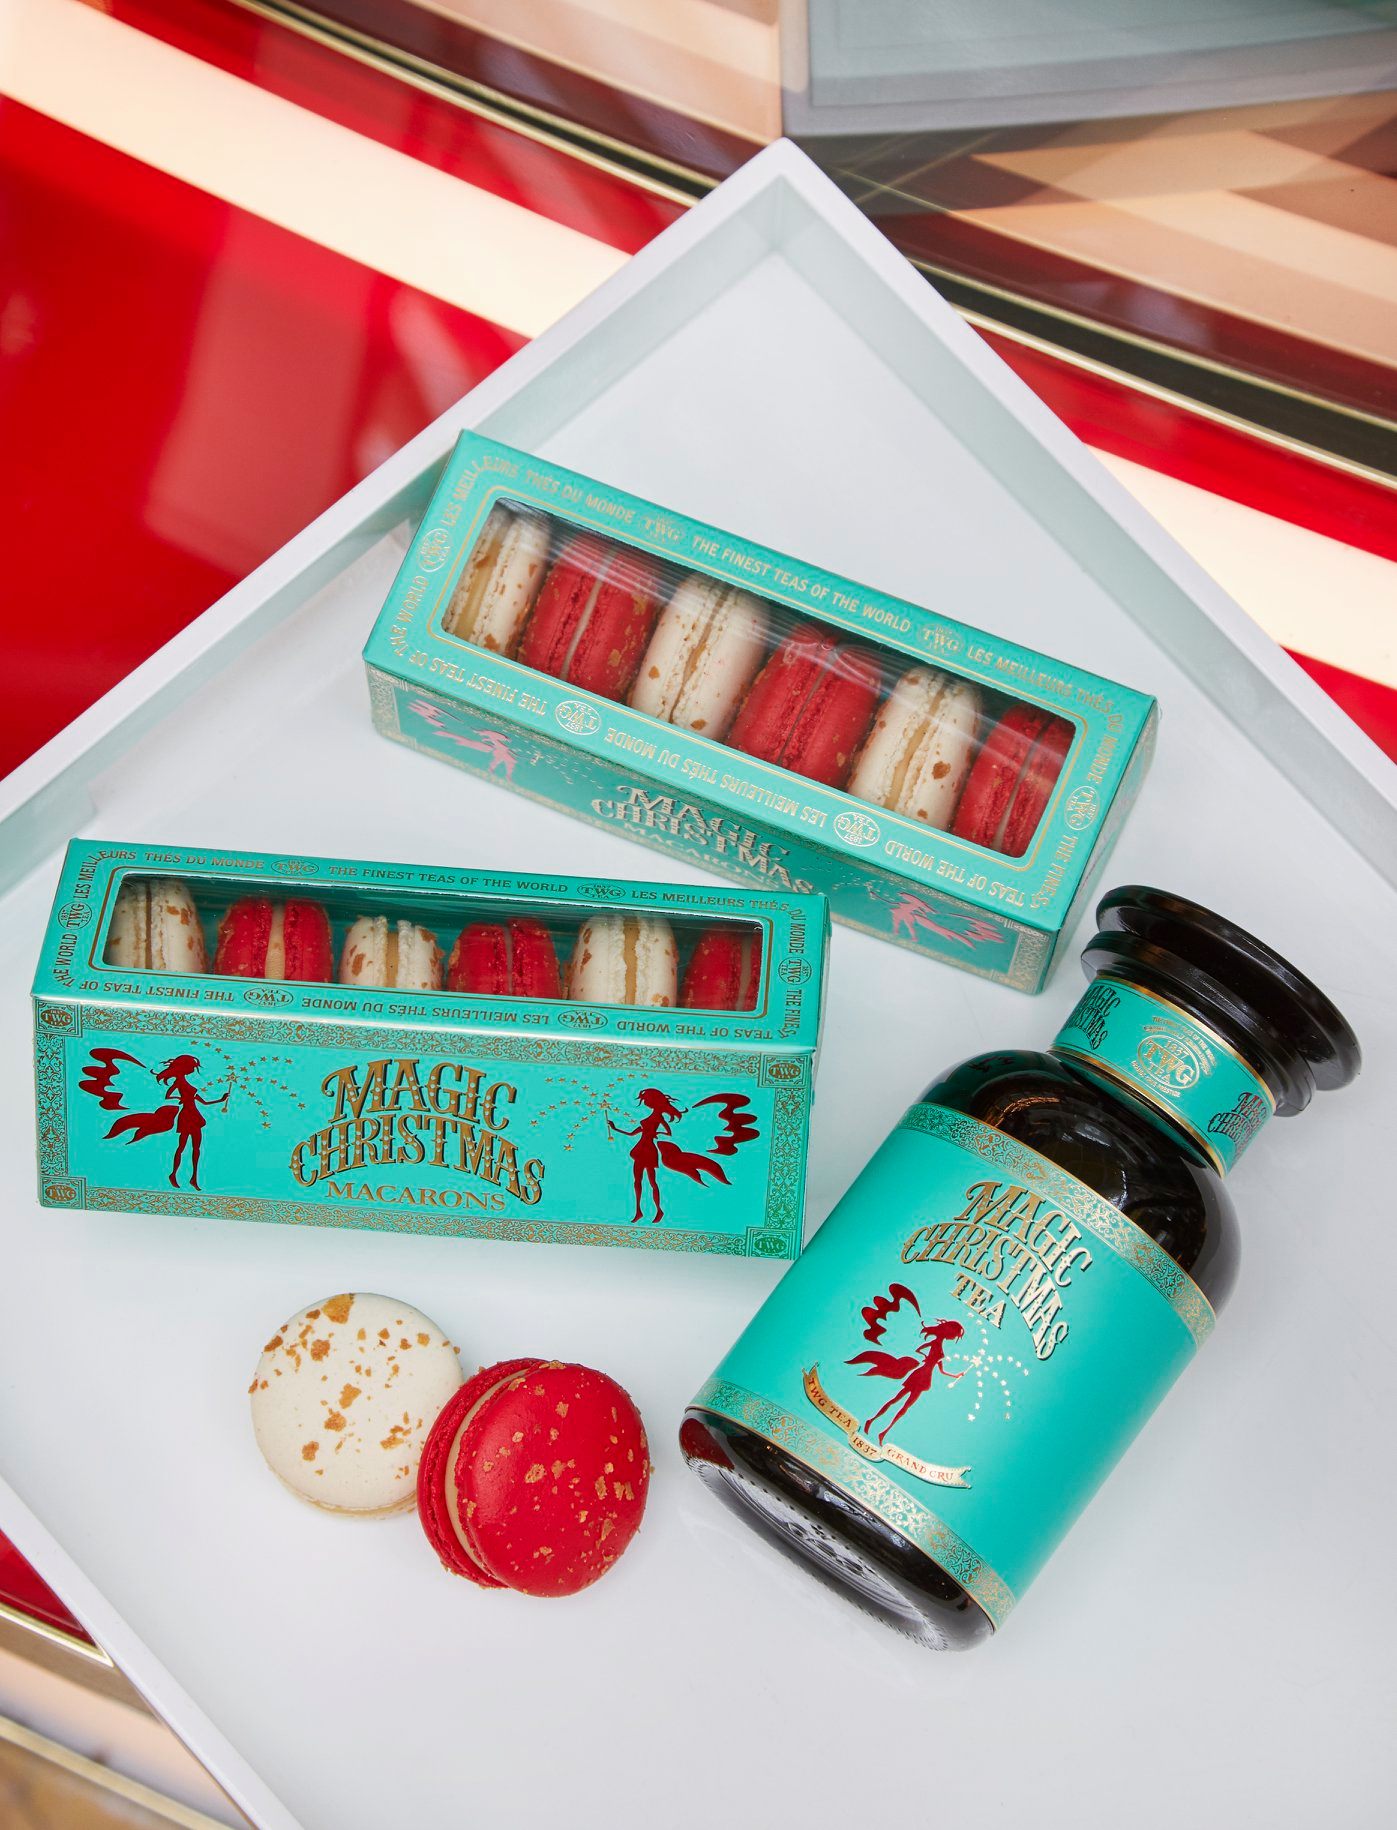 In tantalising shades of Santa Claus’s red and white, TWG Tea has transformed its signature tea-infused macarons into delicious jewels of bite-sized confection. The limited-edition Magic Christmas Tea infused macaron delicately filled with a velvety smooth white chocolate ganache. Available at all TWG Tea Salons in Singapore and on TWGTea.com! 